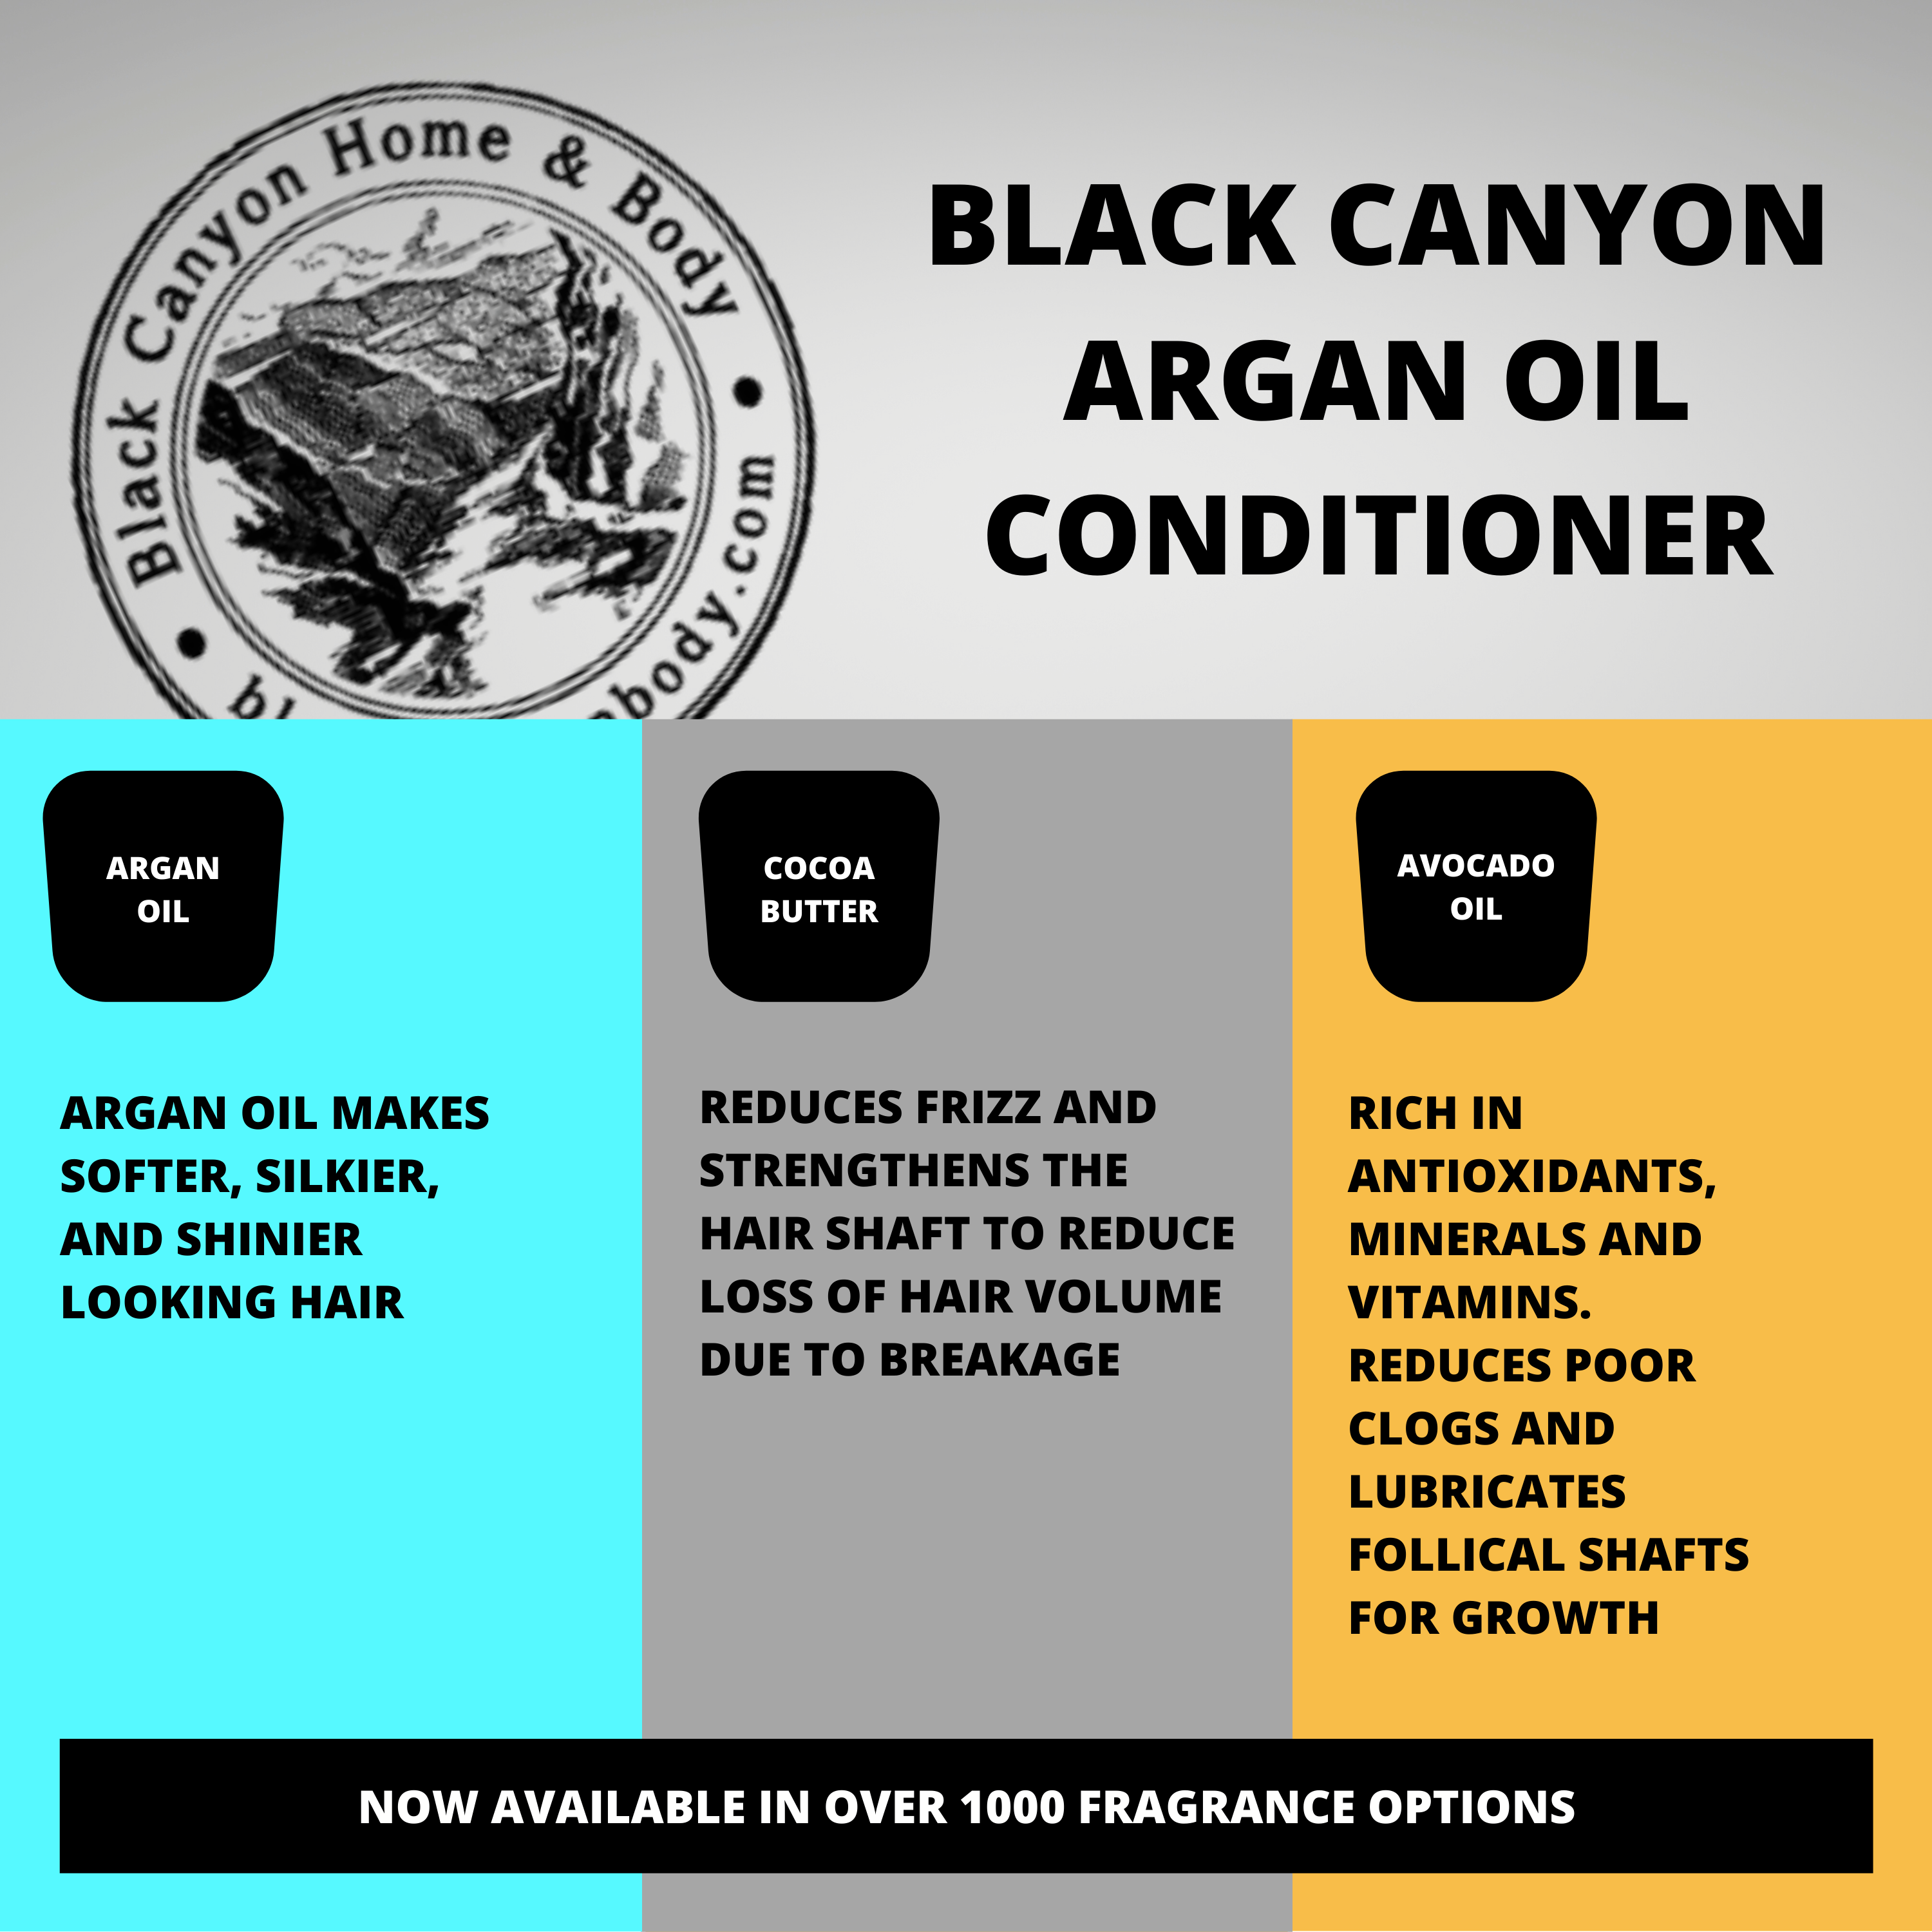 Black Canyon Gingerbread Scented Conditioner with Argan Oil